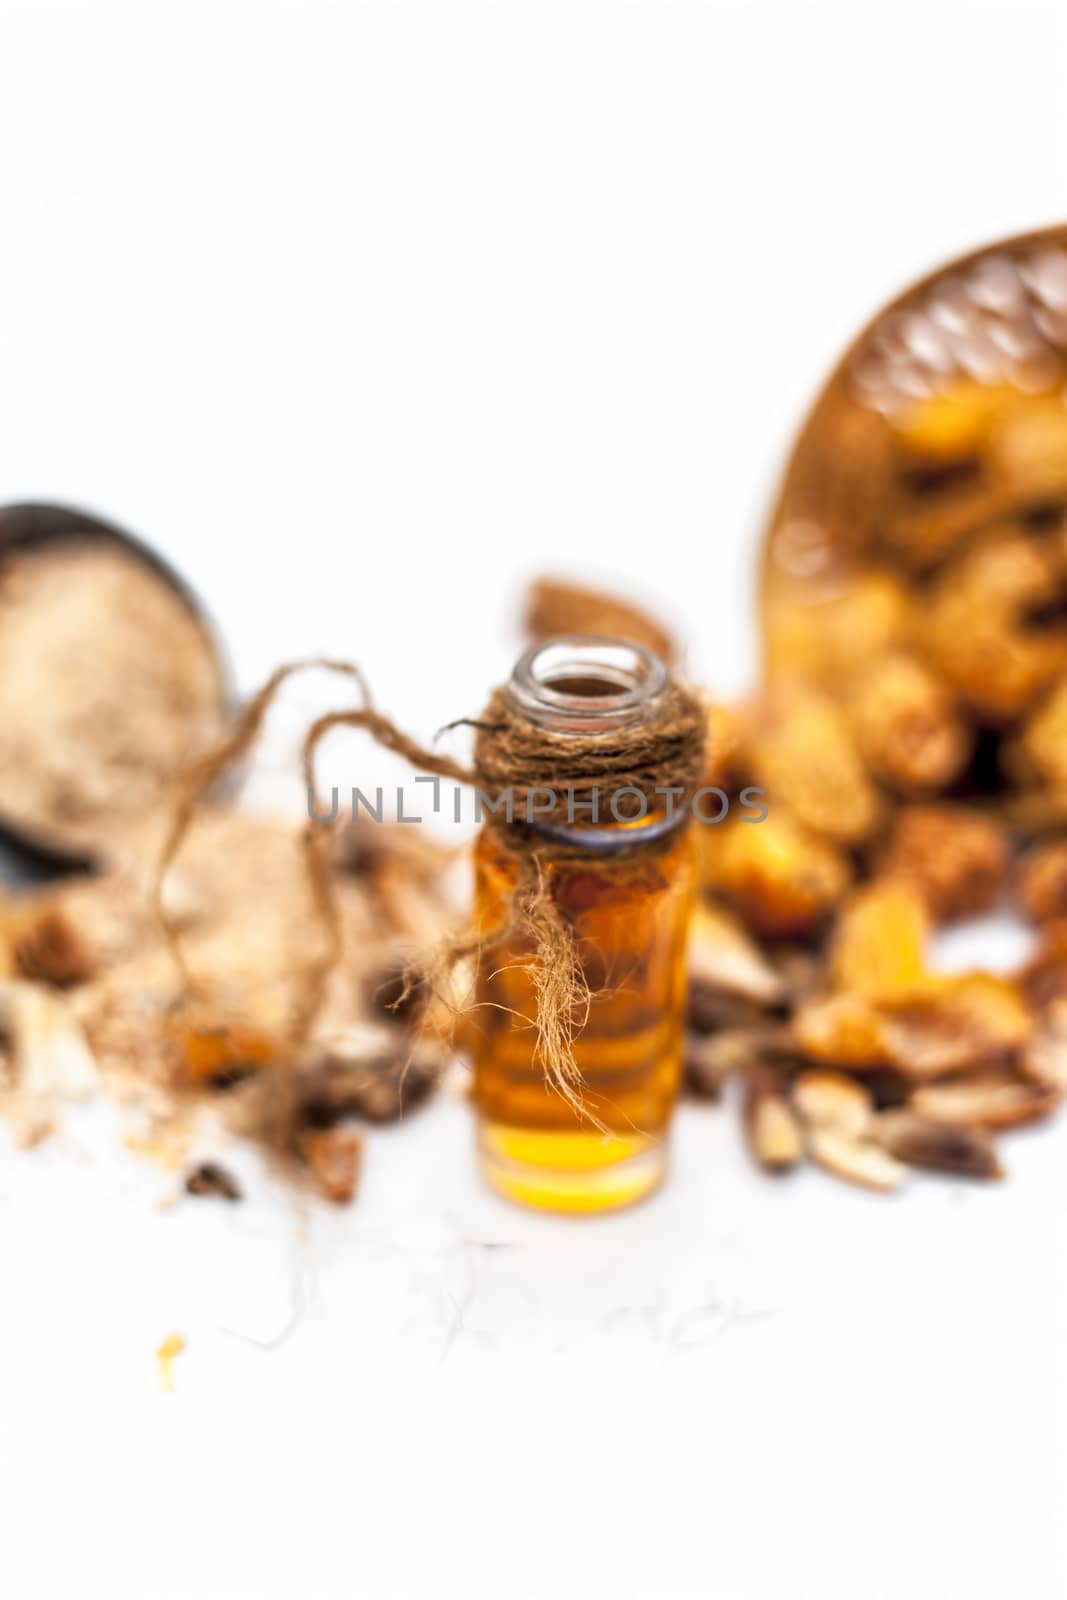 Essential oil of kharek of dried dates or sukhi khajoor or Phoenix dactylifera in a transparent glass bottle isolated on white with raw dried dates and its powder. by mirzamlk